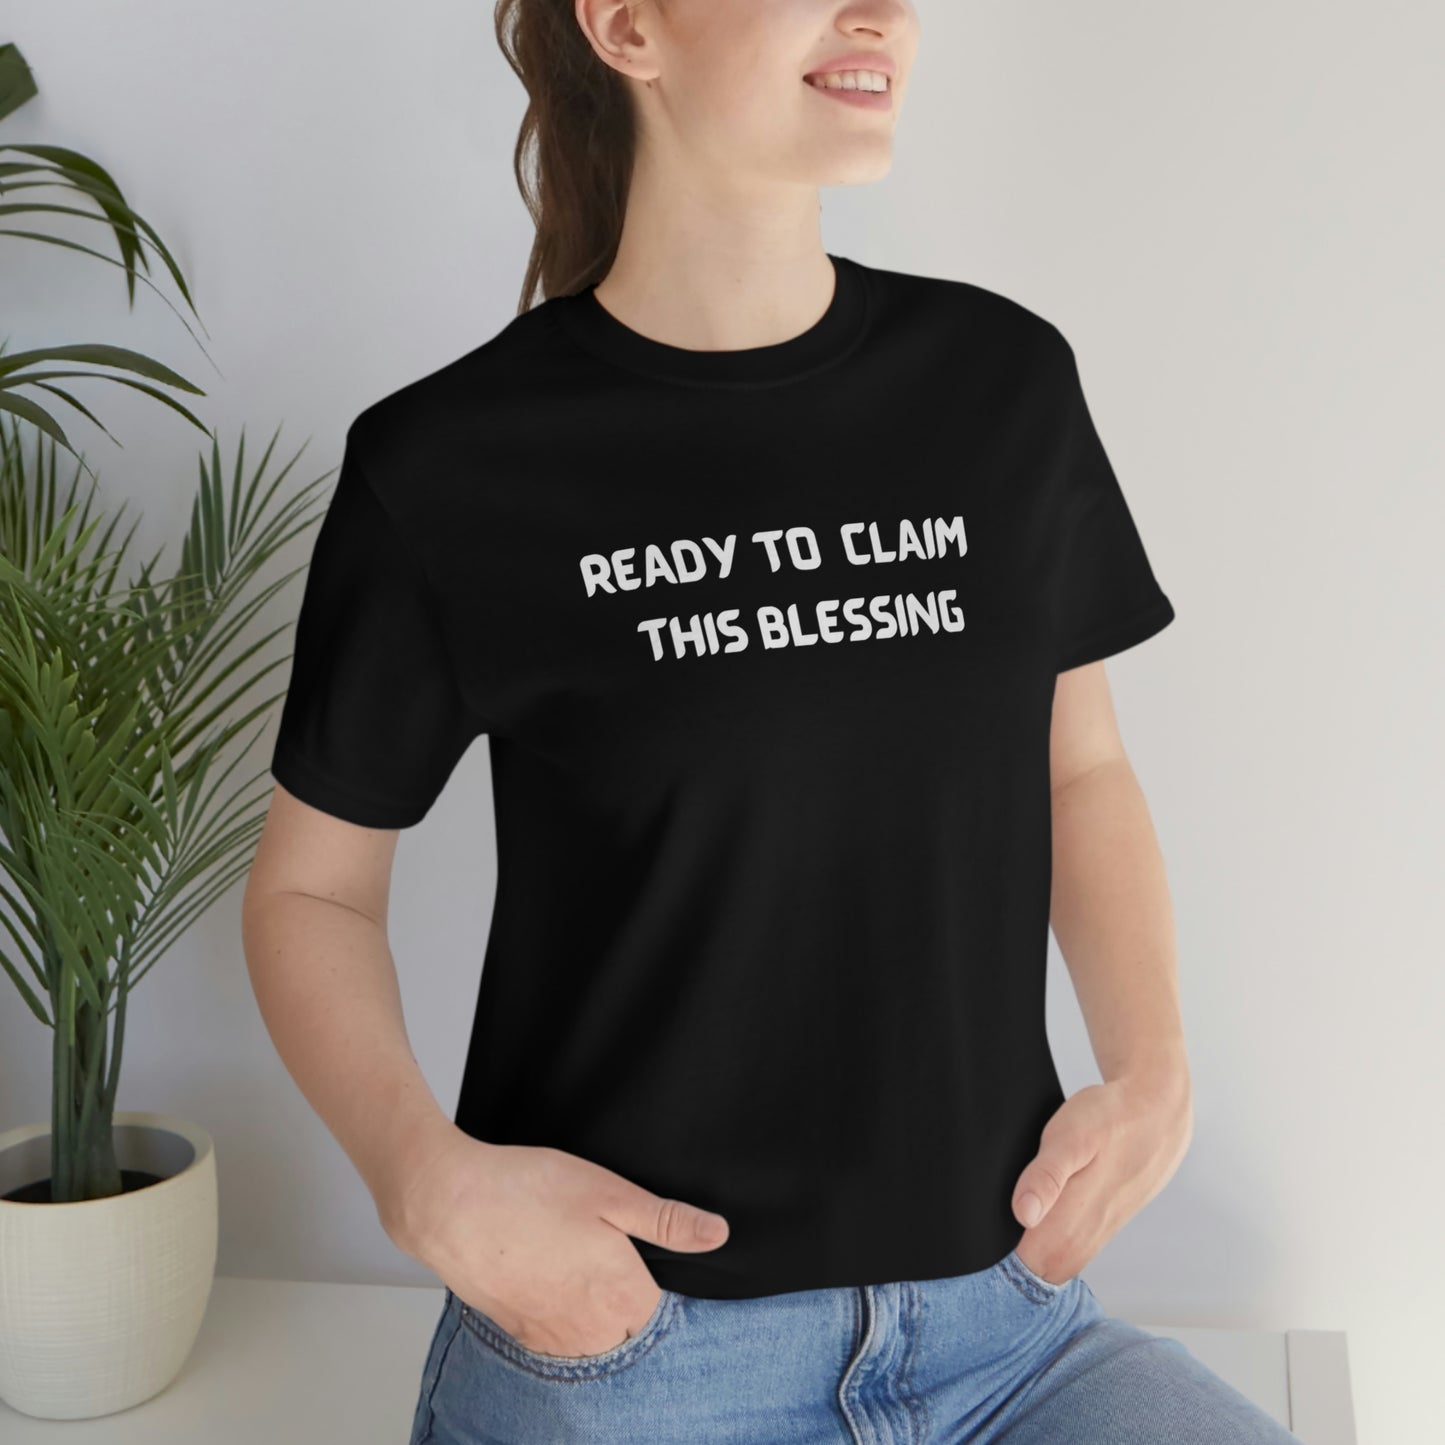 Ready to claim this blessing unisex inspirational words tee shirt T shirt gift expressing gratitude. ( White font)